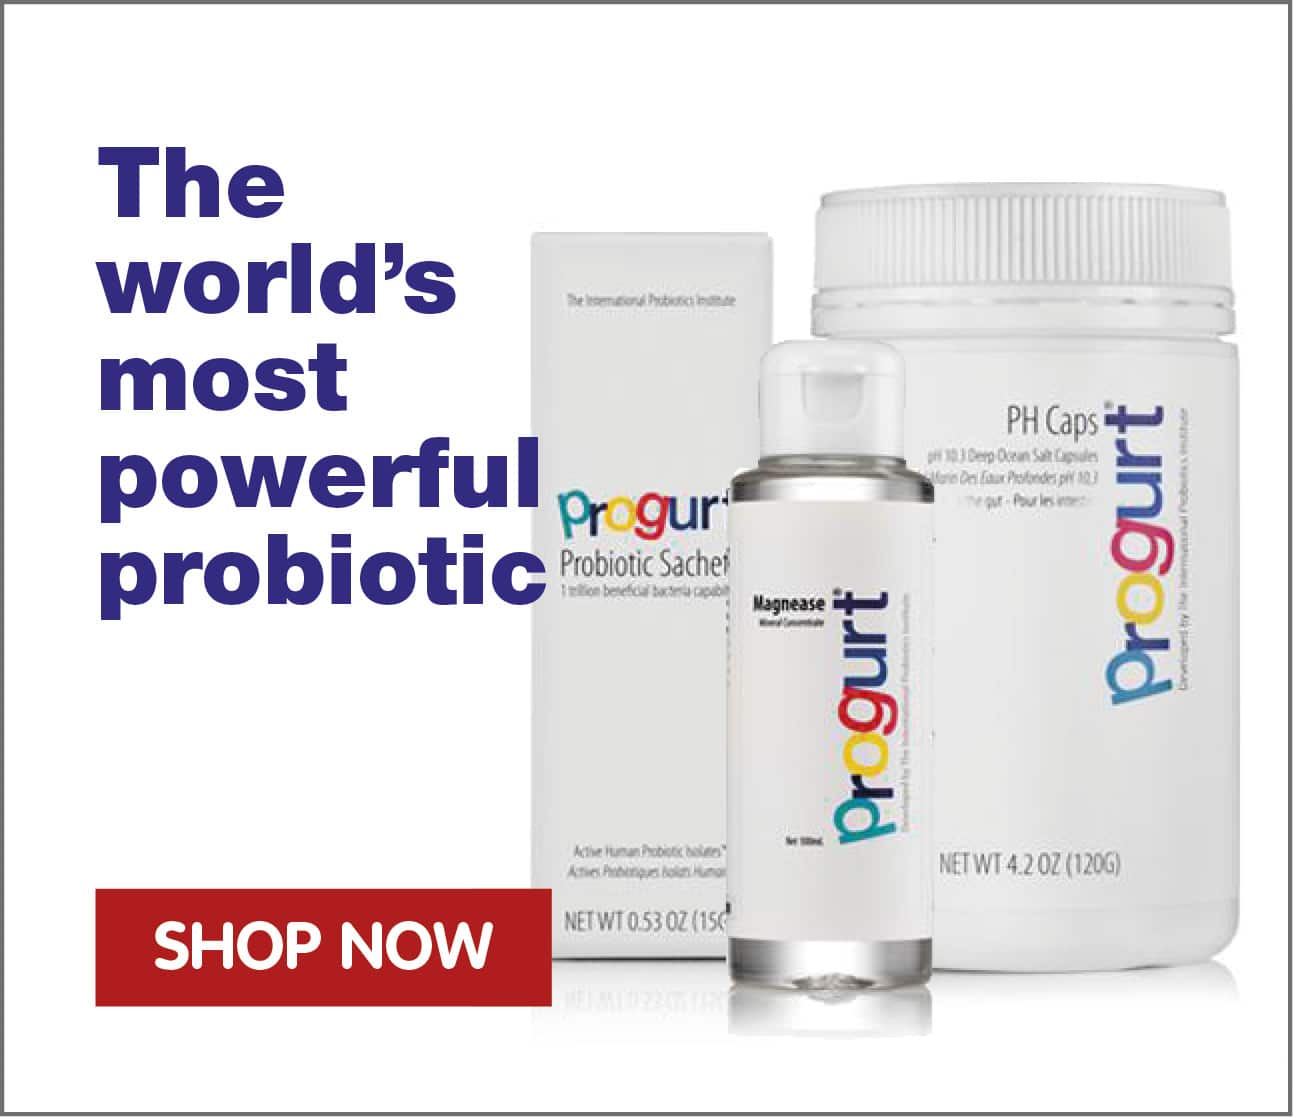 Whats the Strongest Probiotic on the Market?